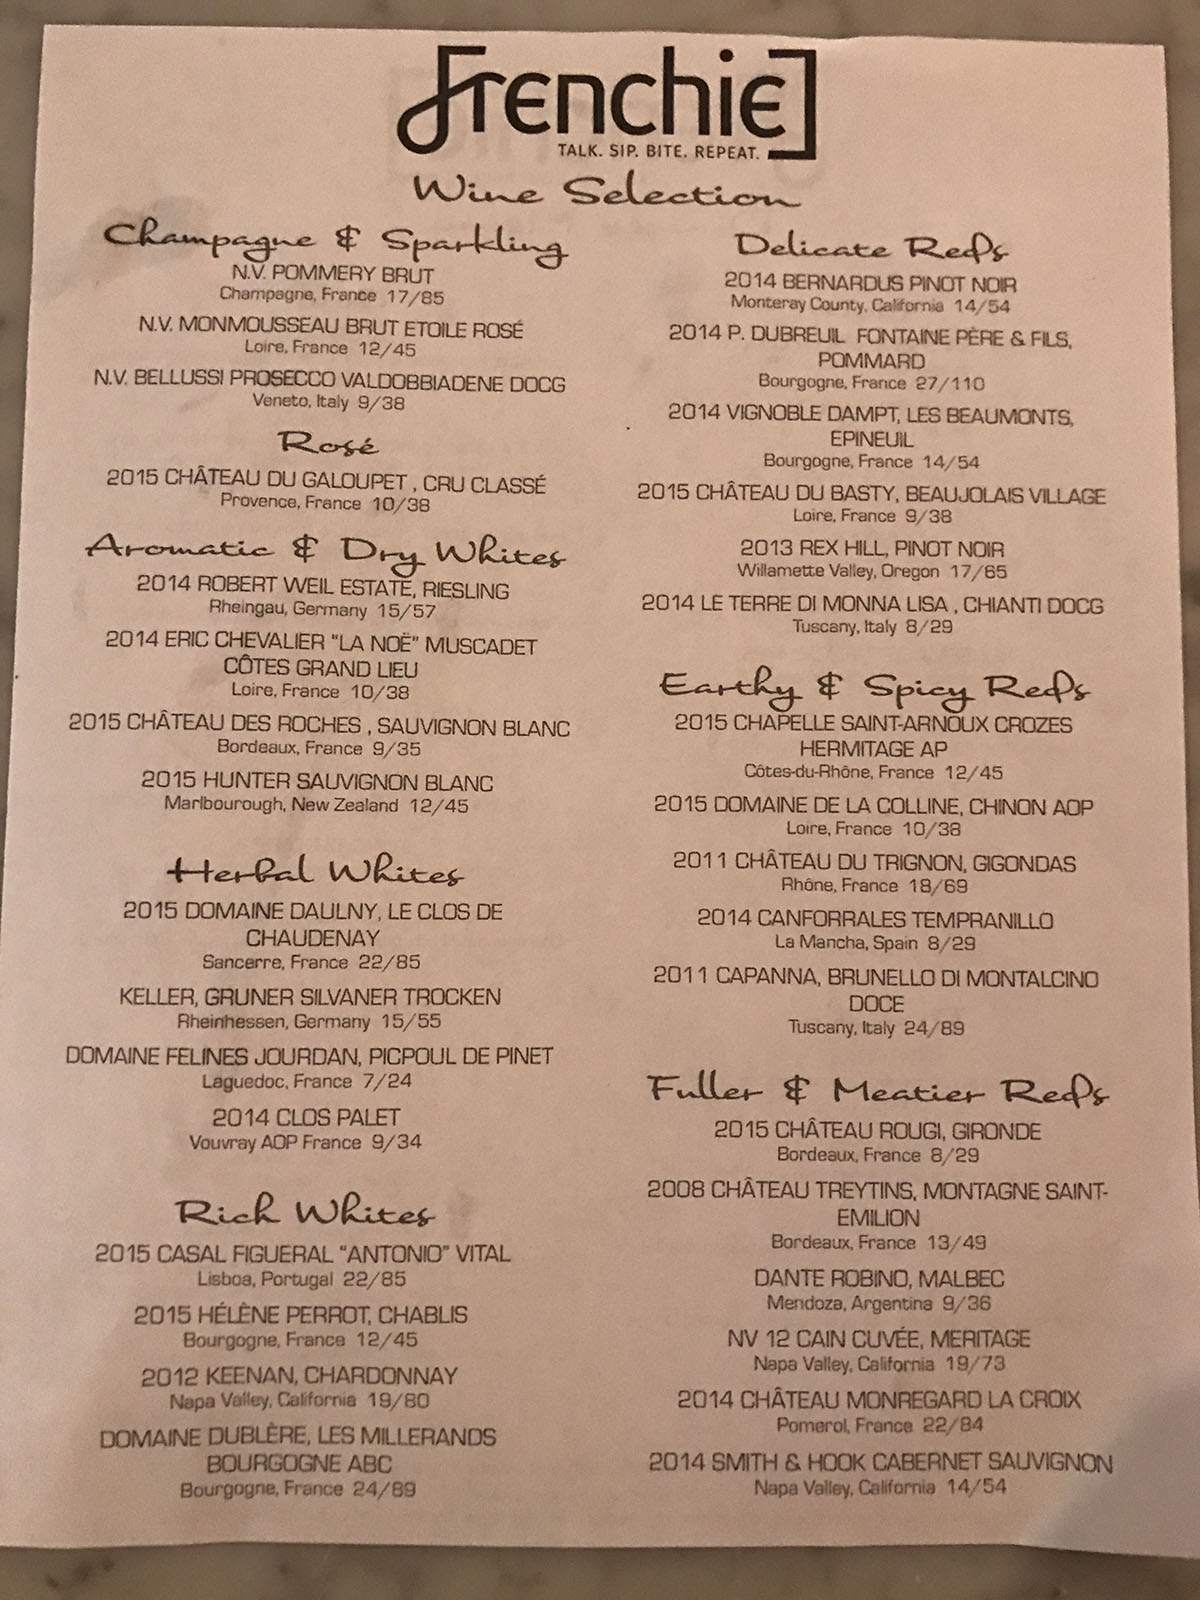 Frenchie wine list in Boston's south end